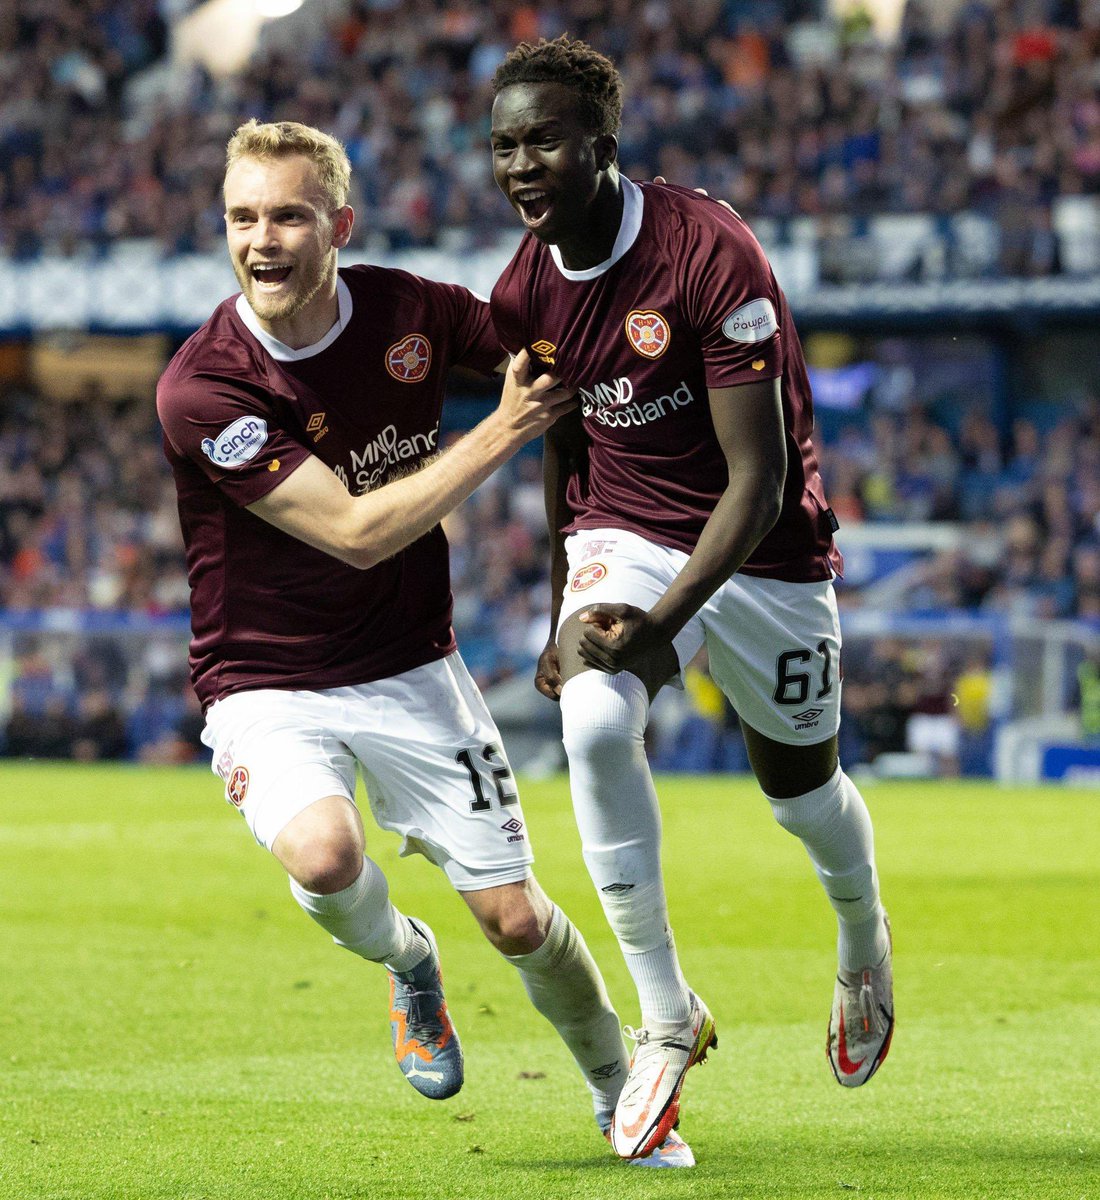 Garang Kuol’s 22/23 stats (Hearts) 🇦🇺⭐️ 

- 205 minutes played
- 9 appearances (1 start)
- 1 goal
- 0 assists

Where should the winger be loaned to next?